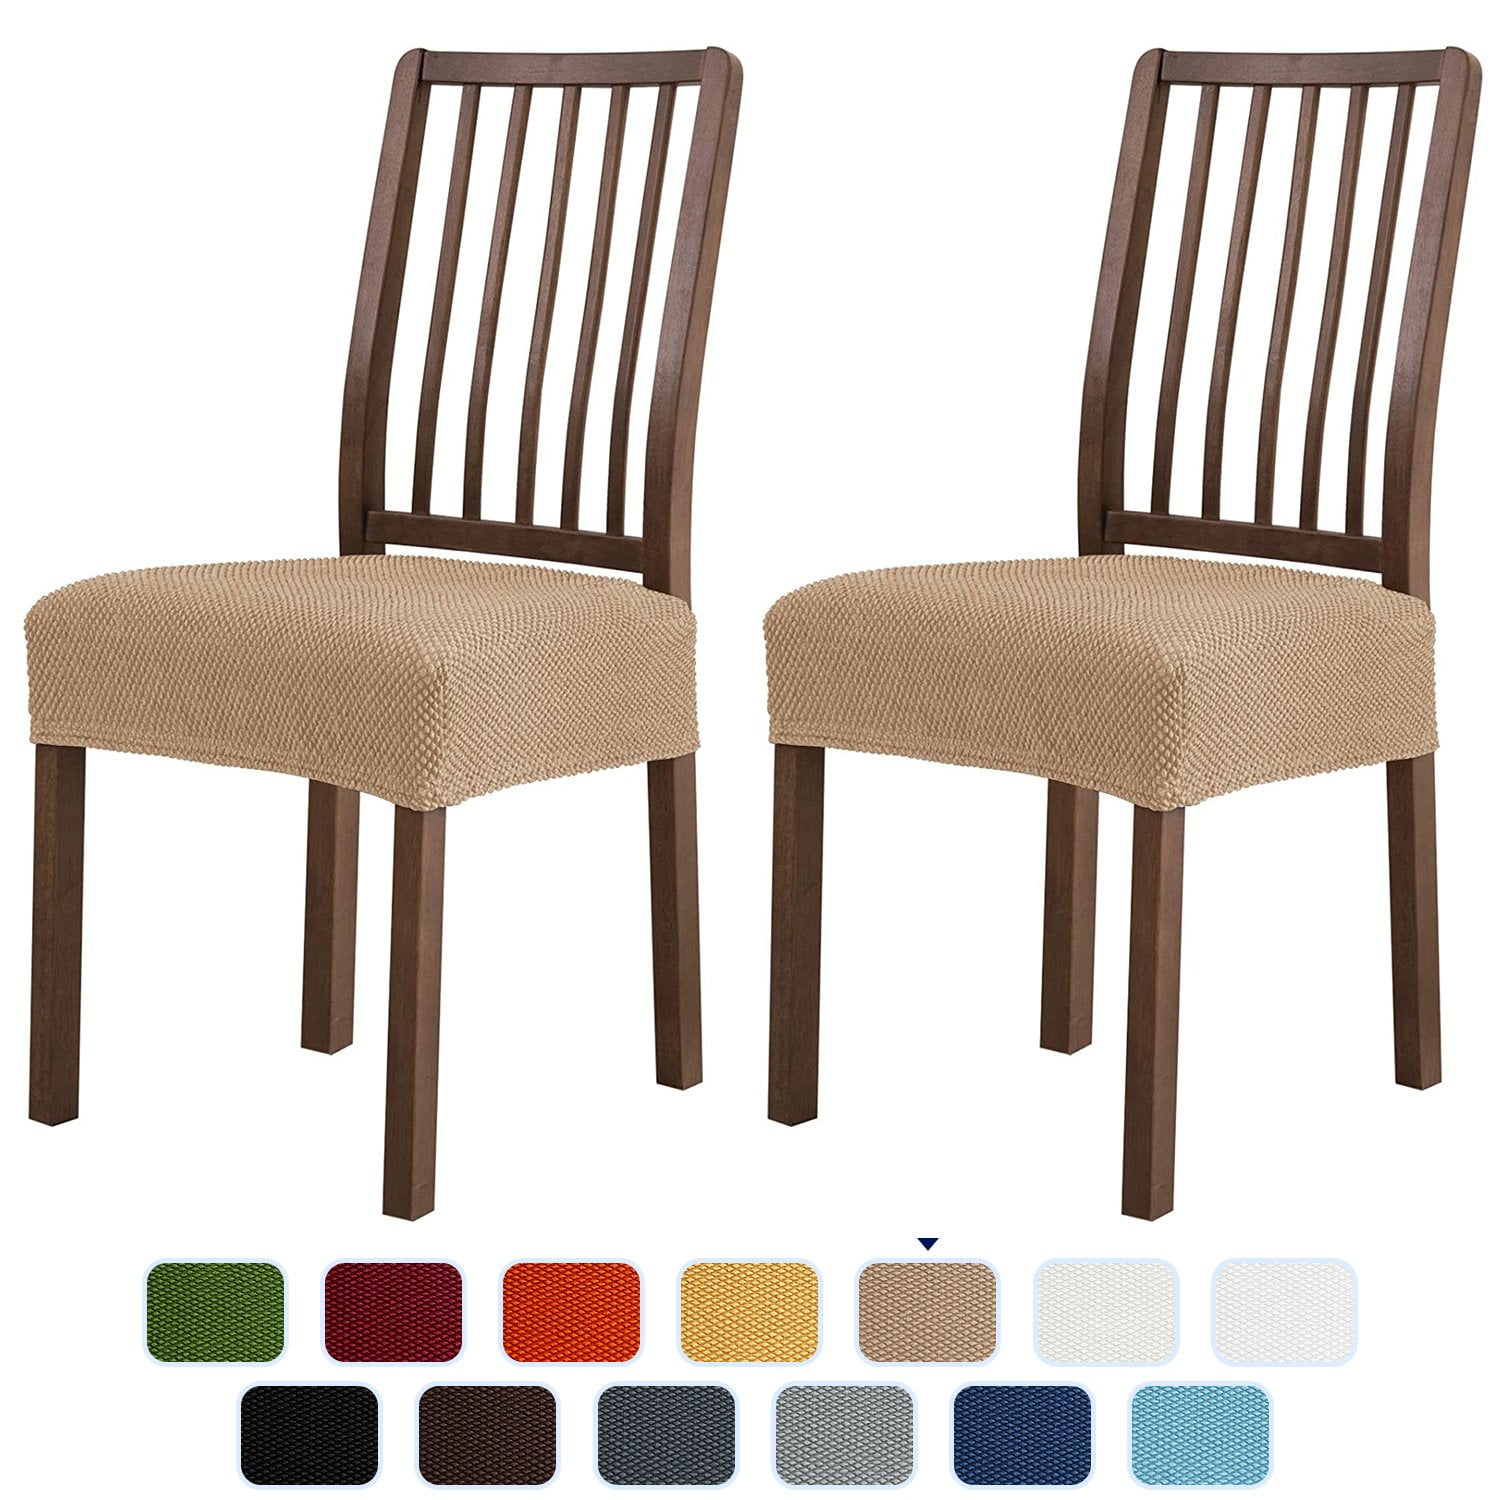 2PCS Short Back Dining Room Bar Stool Chair Seat Cover for Wedding Banquet 